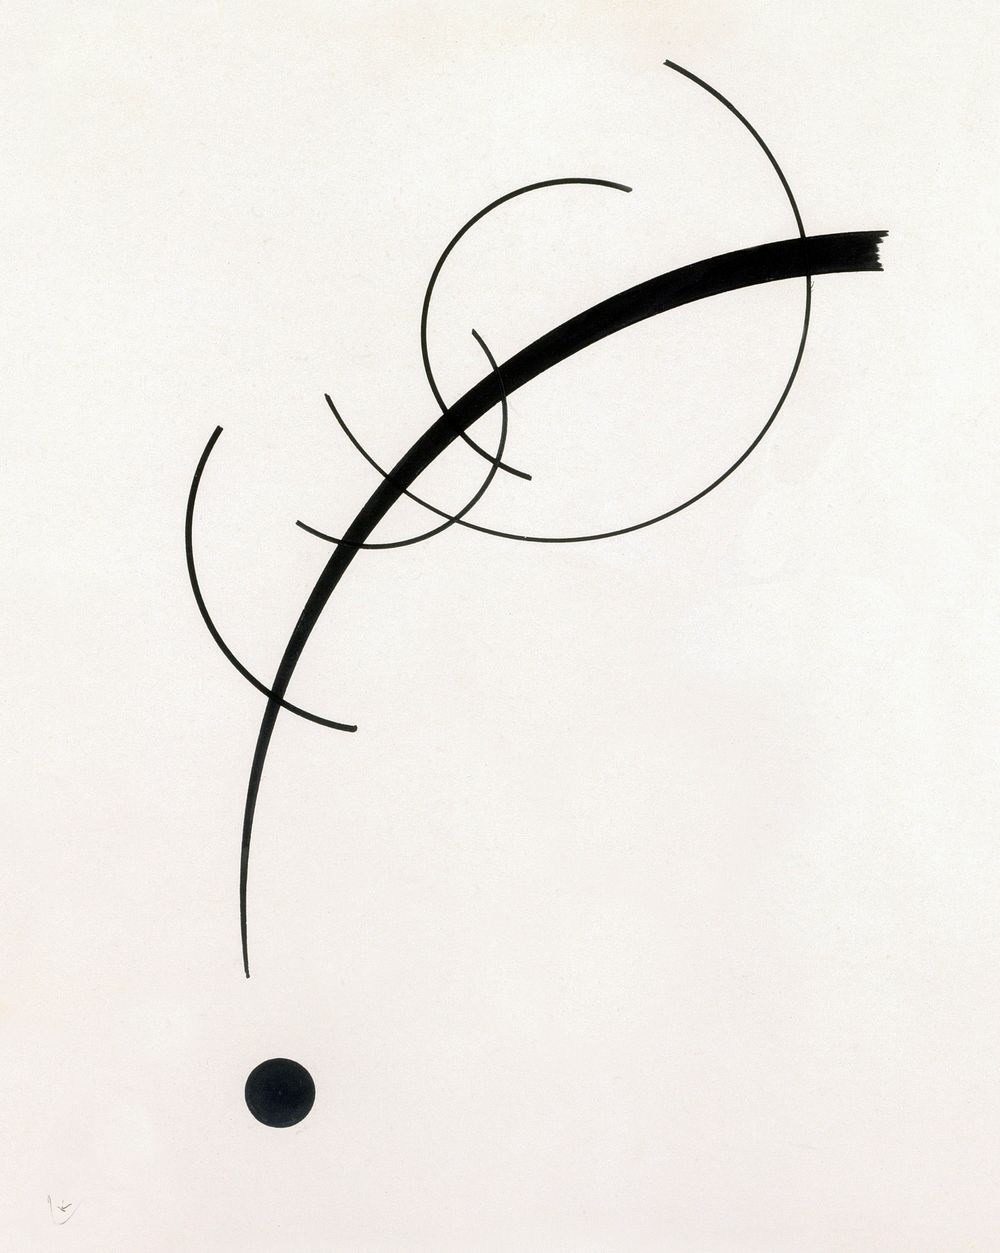 Free Curve to the Point: Accompanying Sound of Geometric Curves (1925) print in high resolution by Wassily Kandinsky.…